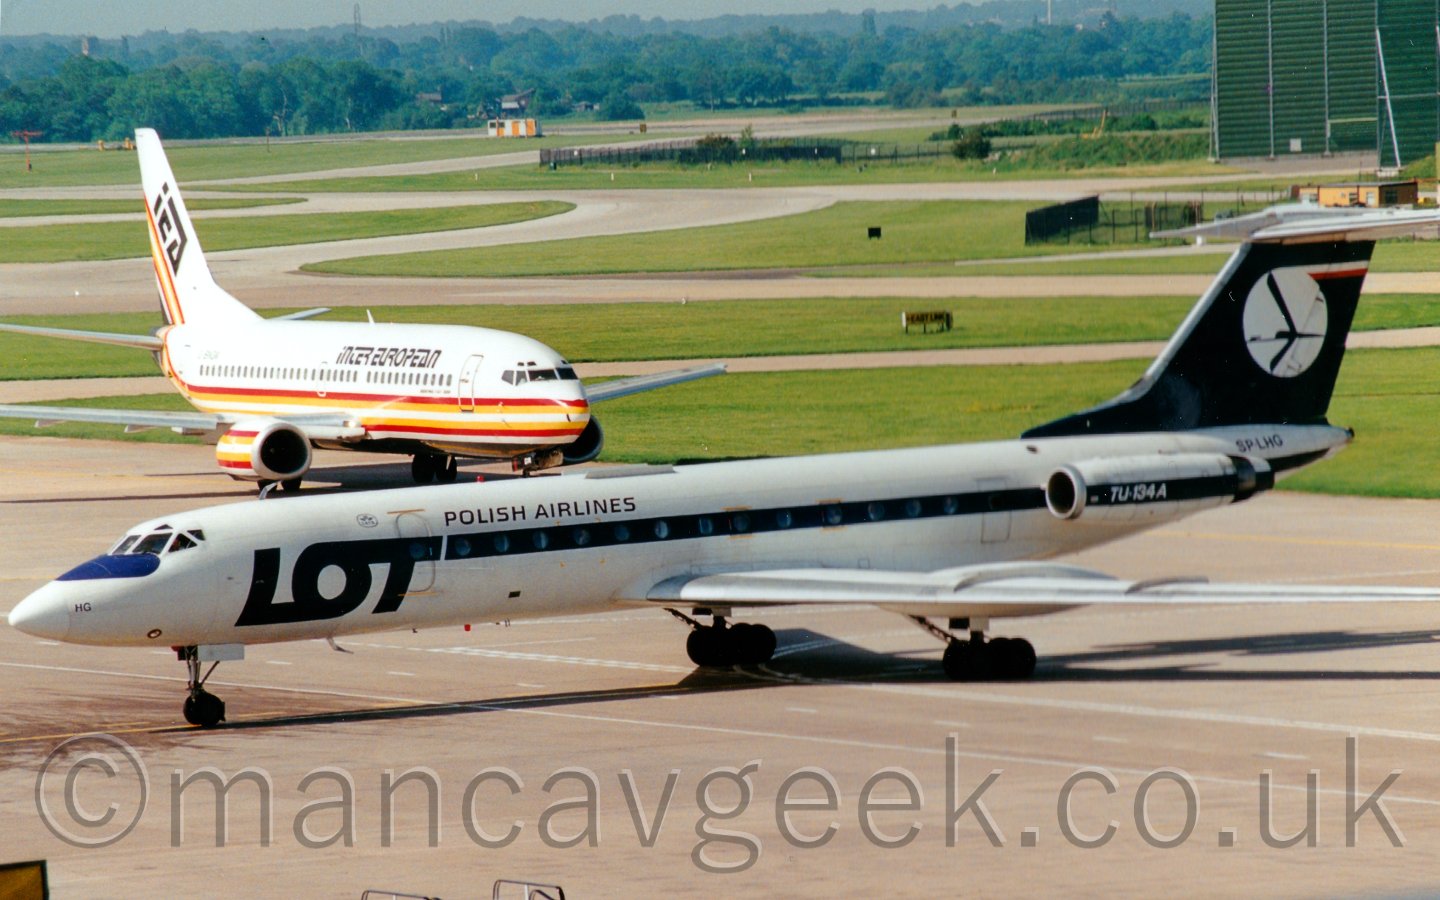 Side view of a white and blue twin engined jet airliner, with the engines mounted on the rear fuselage, taxiing from right to left, with another airliner taxiing towards it in the background, and grass and taxiways leading off to trees in the far distance.